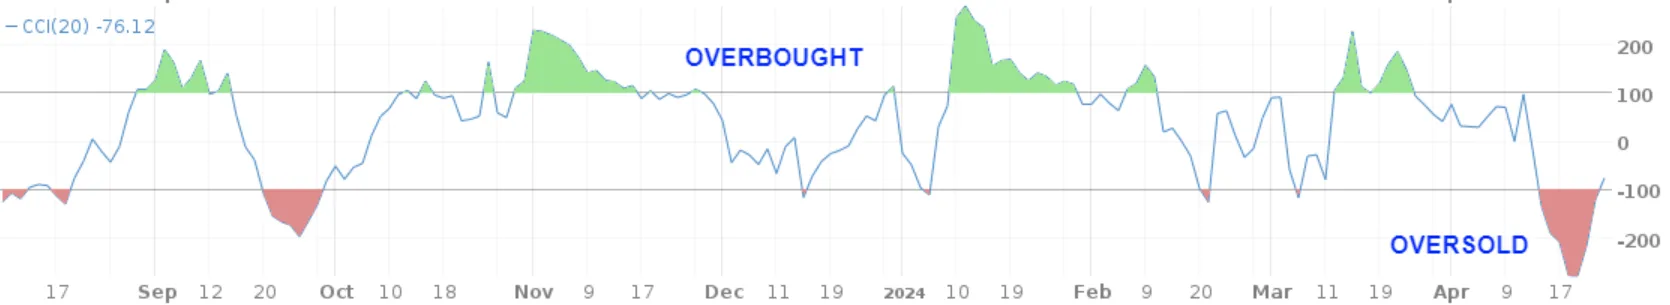 CCI overbought and oversold